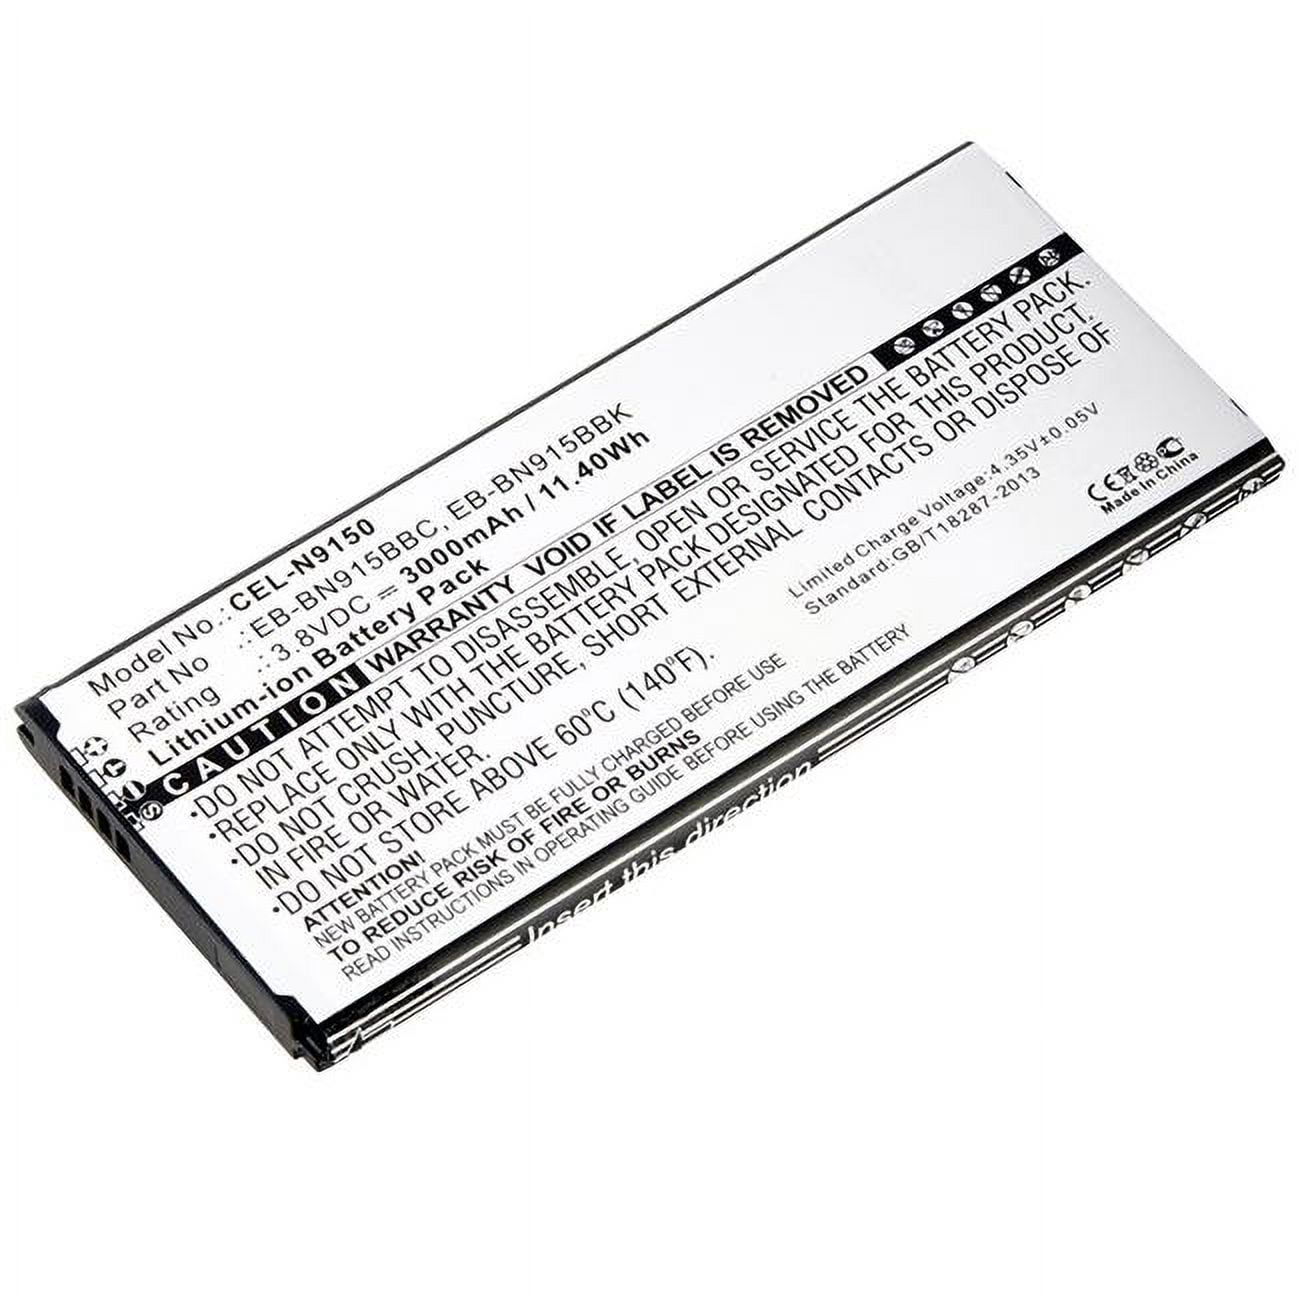 Picture of Ultralast CEL-N9150 3.8V & 3000 mAh Replacement Lithium-Ion Battery for Samsung Galaxy Note Edge Cellular Phone